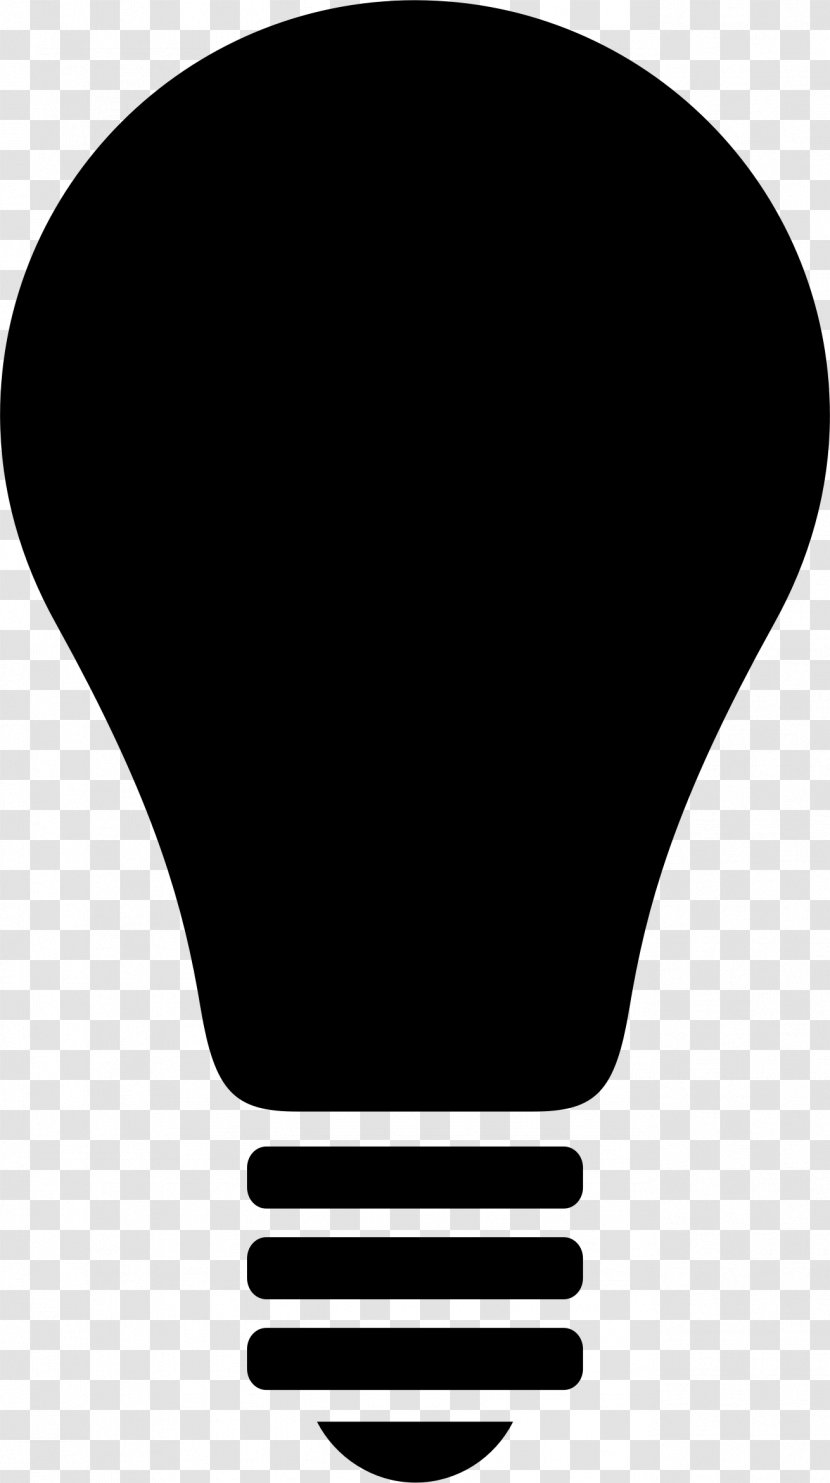 Incandescent Light Bulb Lamp Christmas Lights Clip Art - Electricity - People Icon Transparent PNG